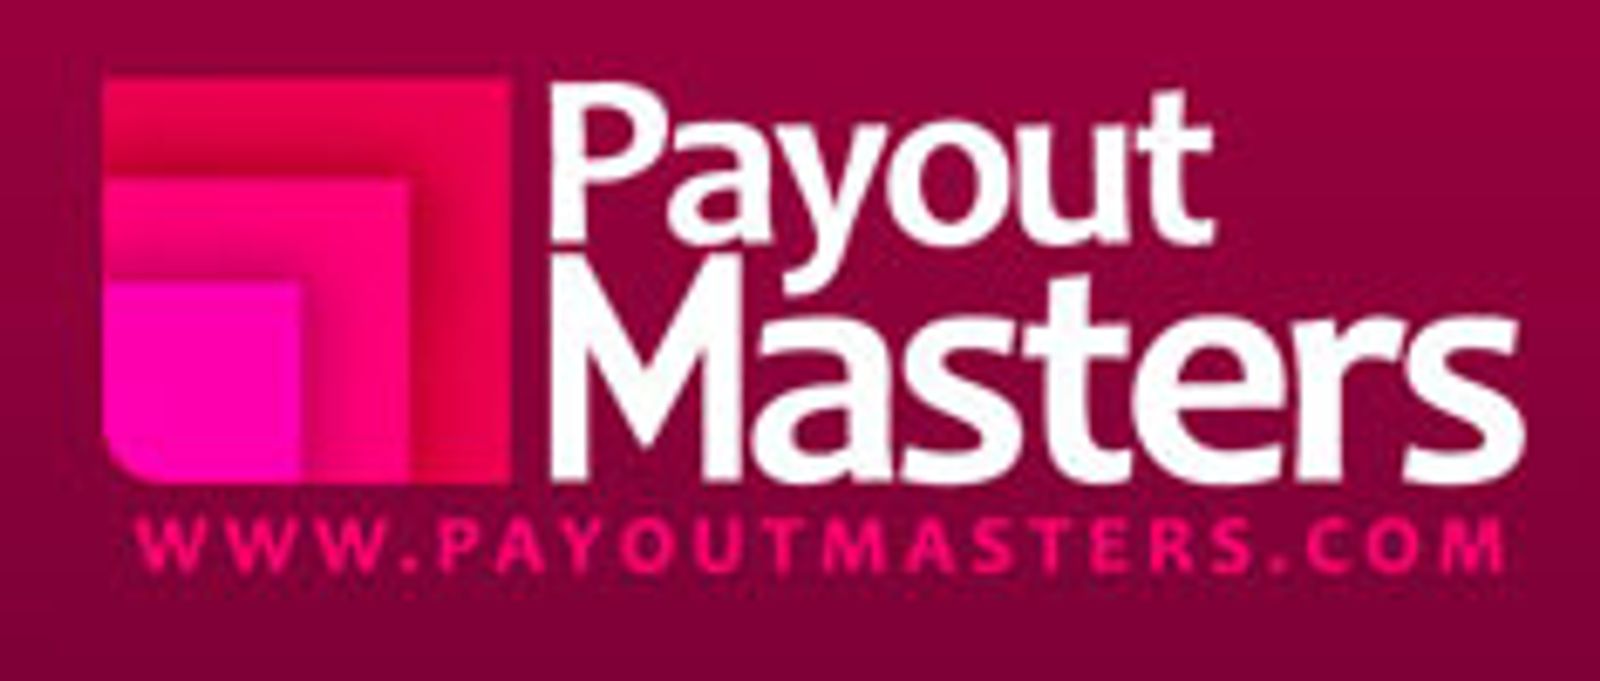 Payoutmasters Ends First Year with a $55pps Offer on All Sites, Every Weekend Until the End of 2009